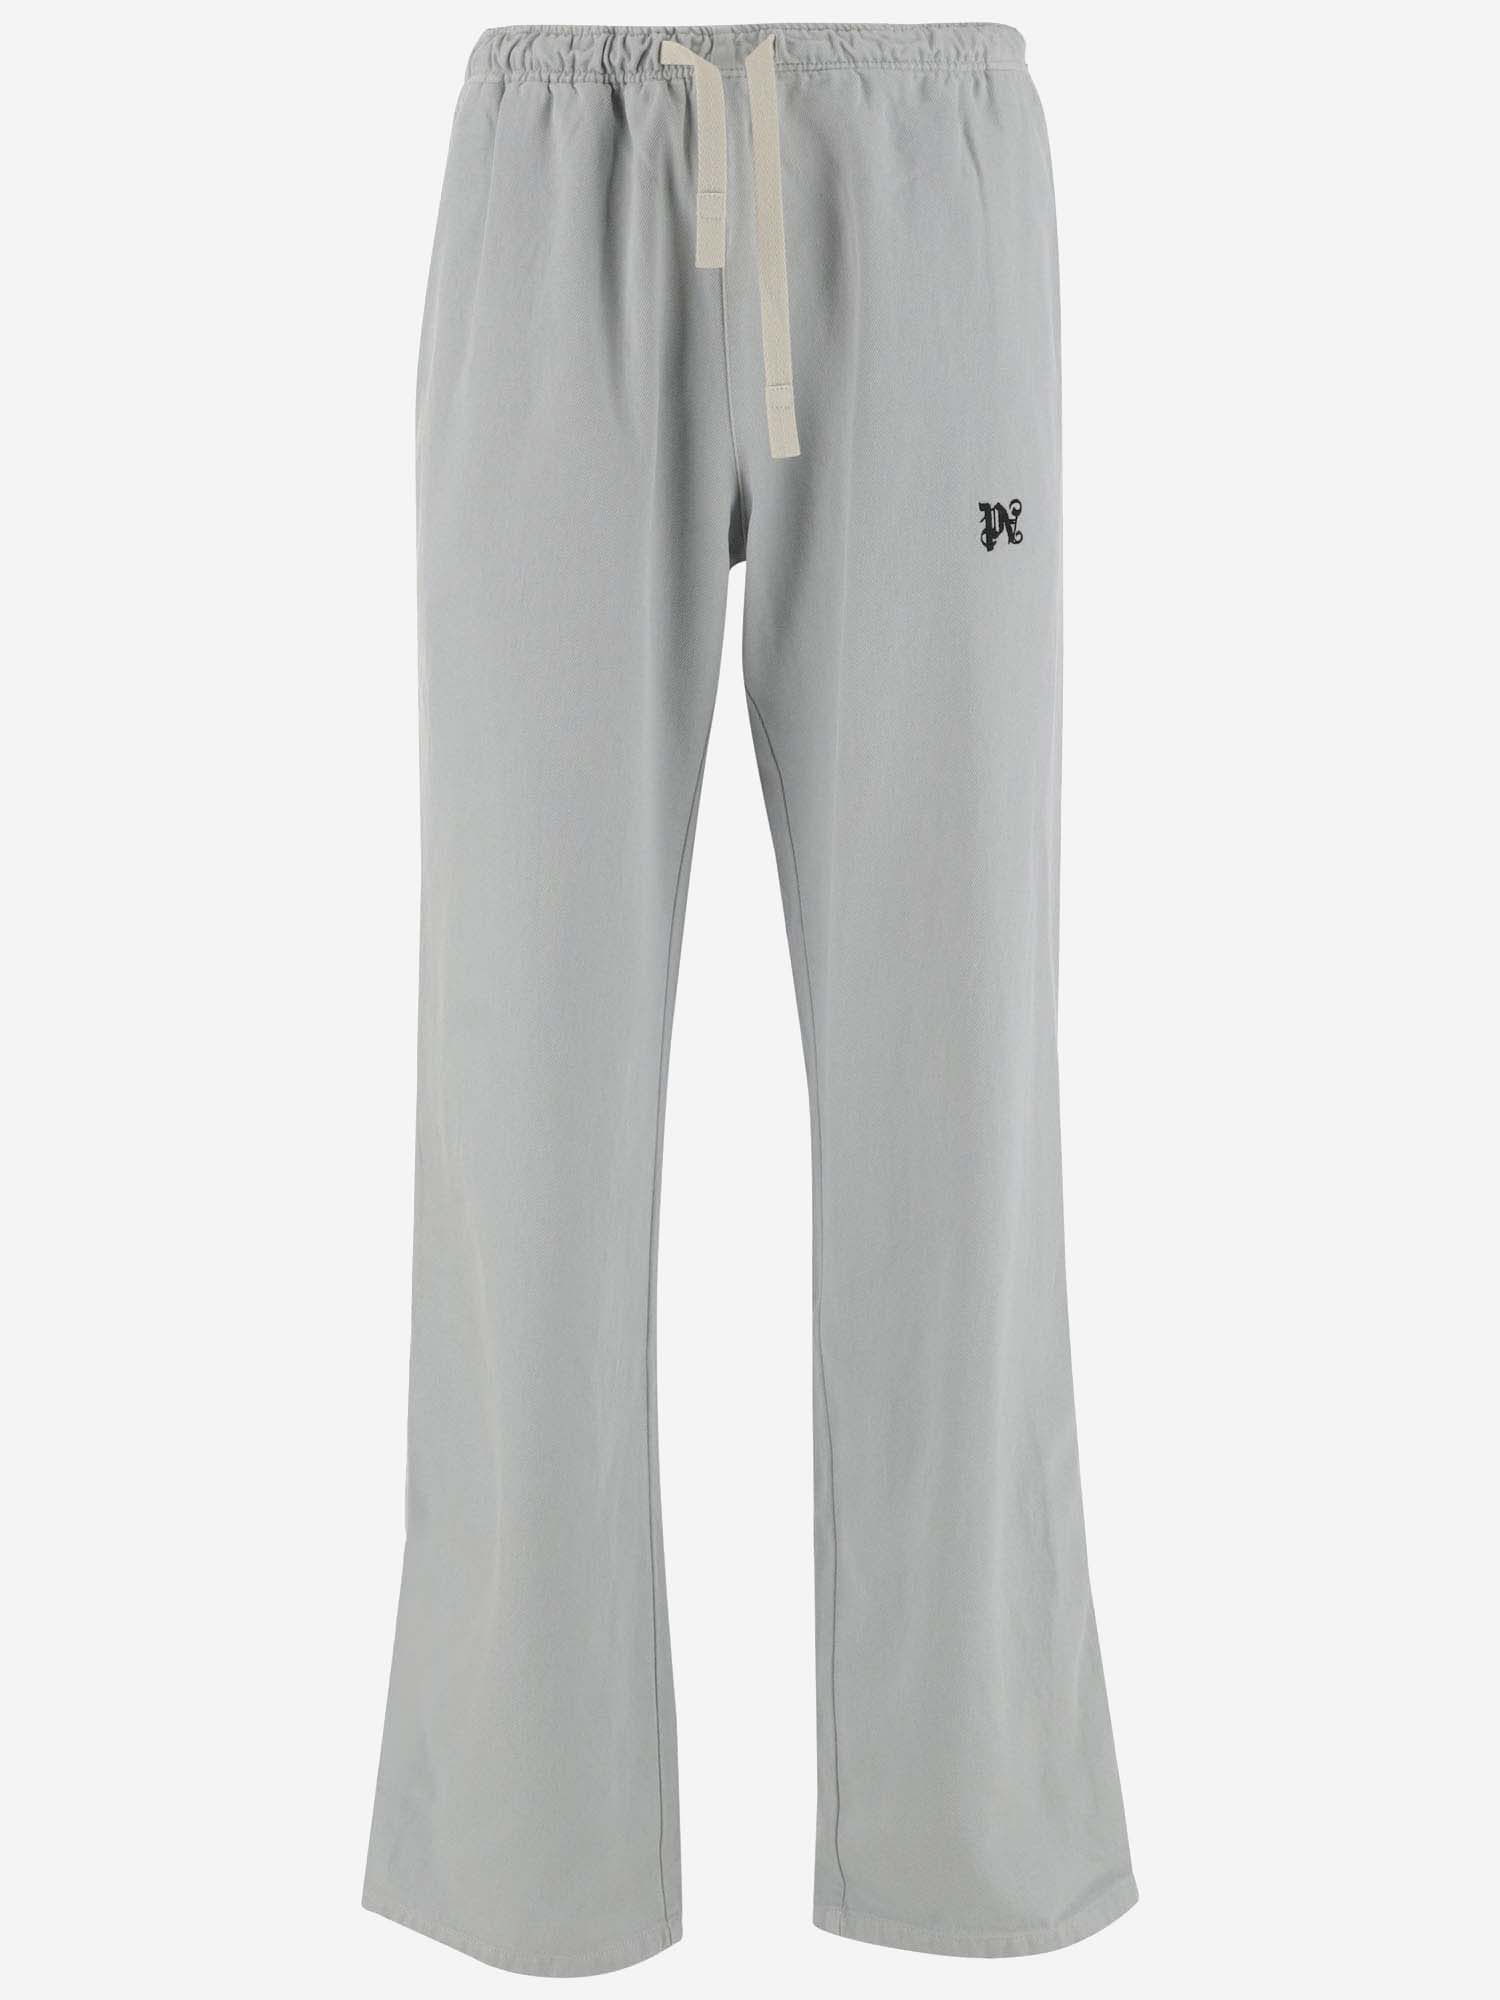 PALM ANGELS COTTON BLEND TRACK PANTS WITH LOGO